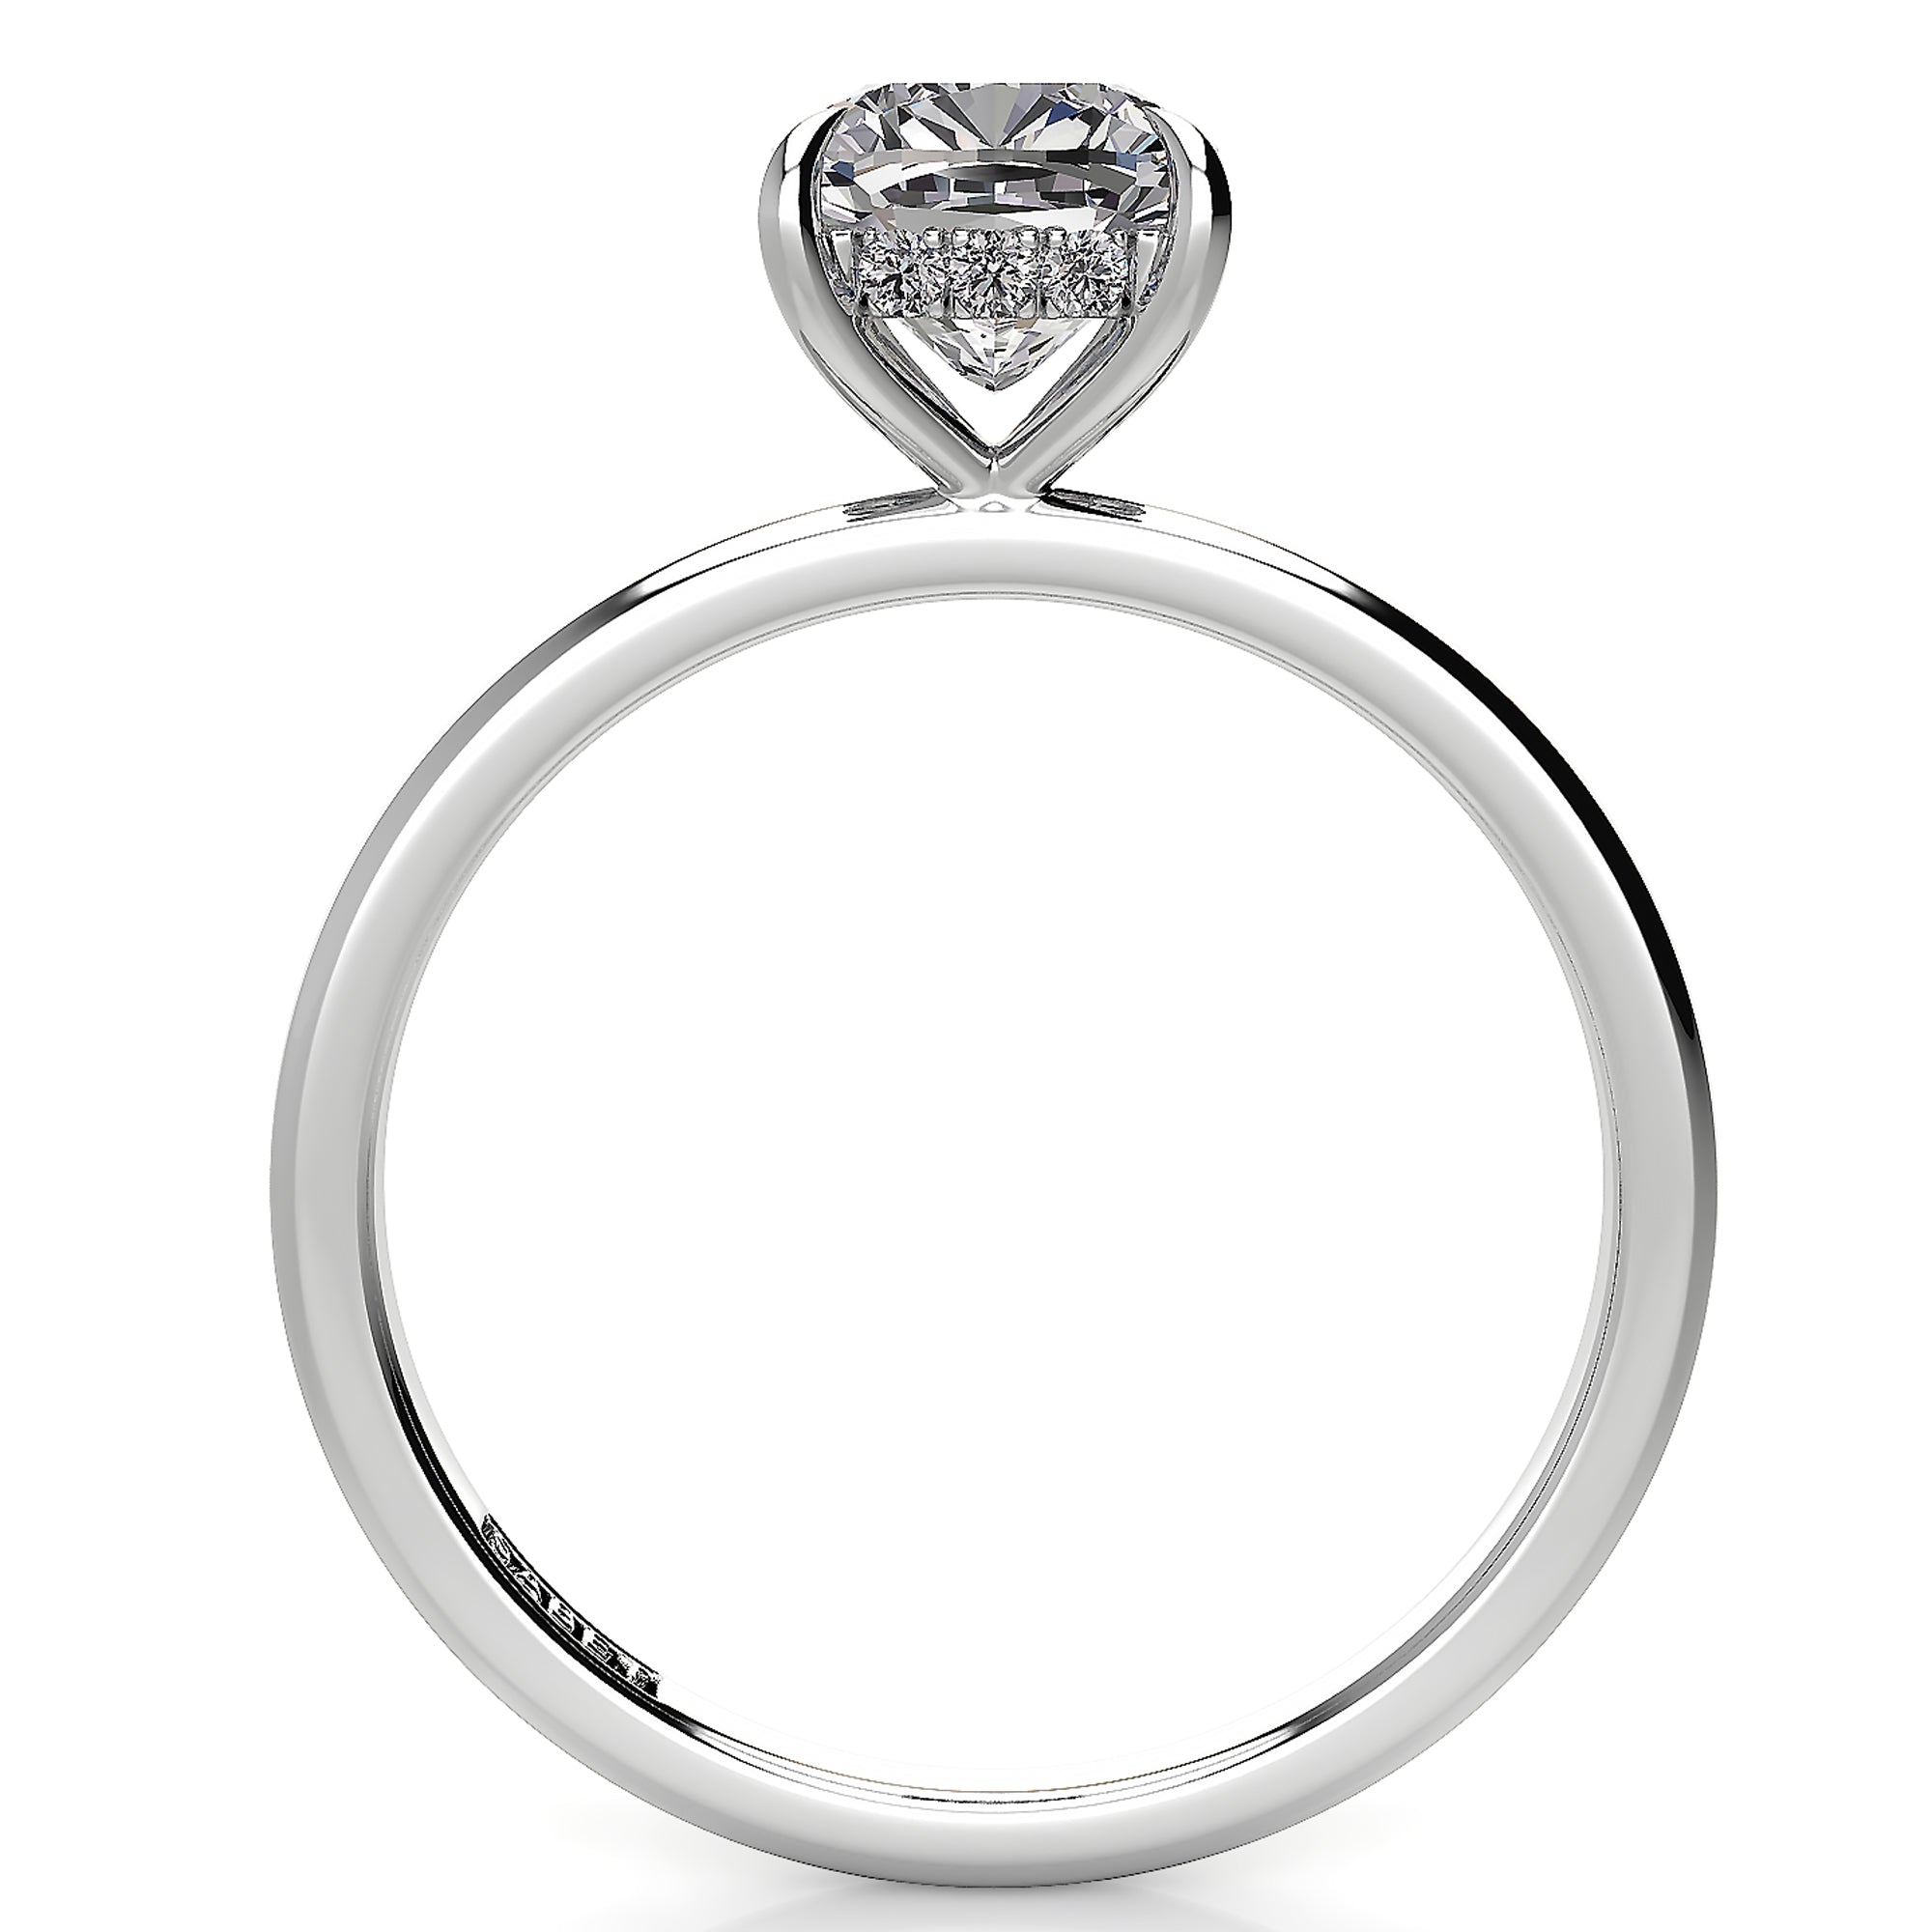 Solitaire Cushion Hidden Halo Engagement Ring